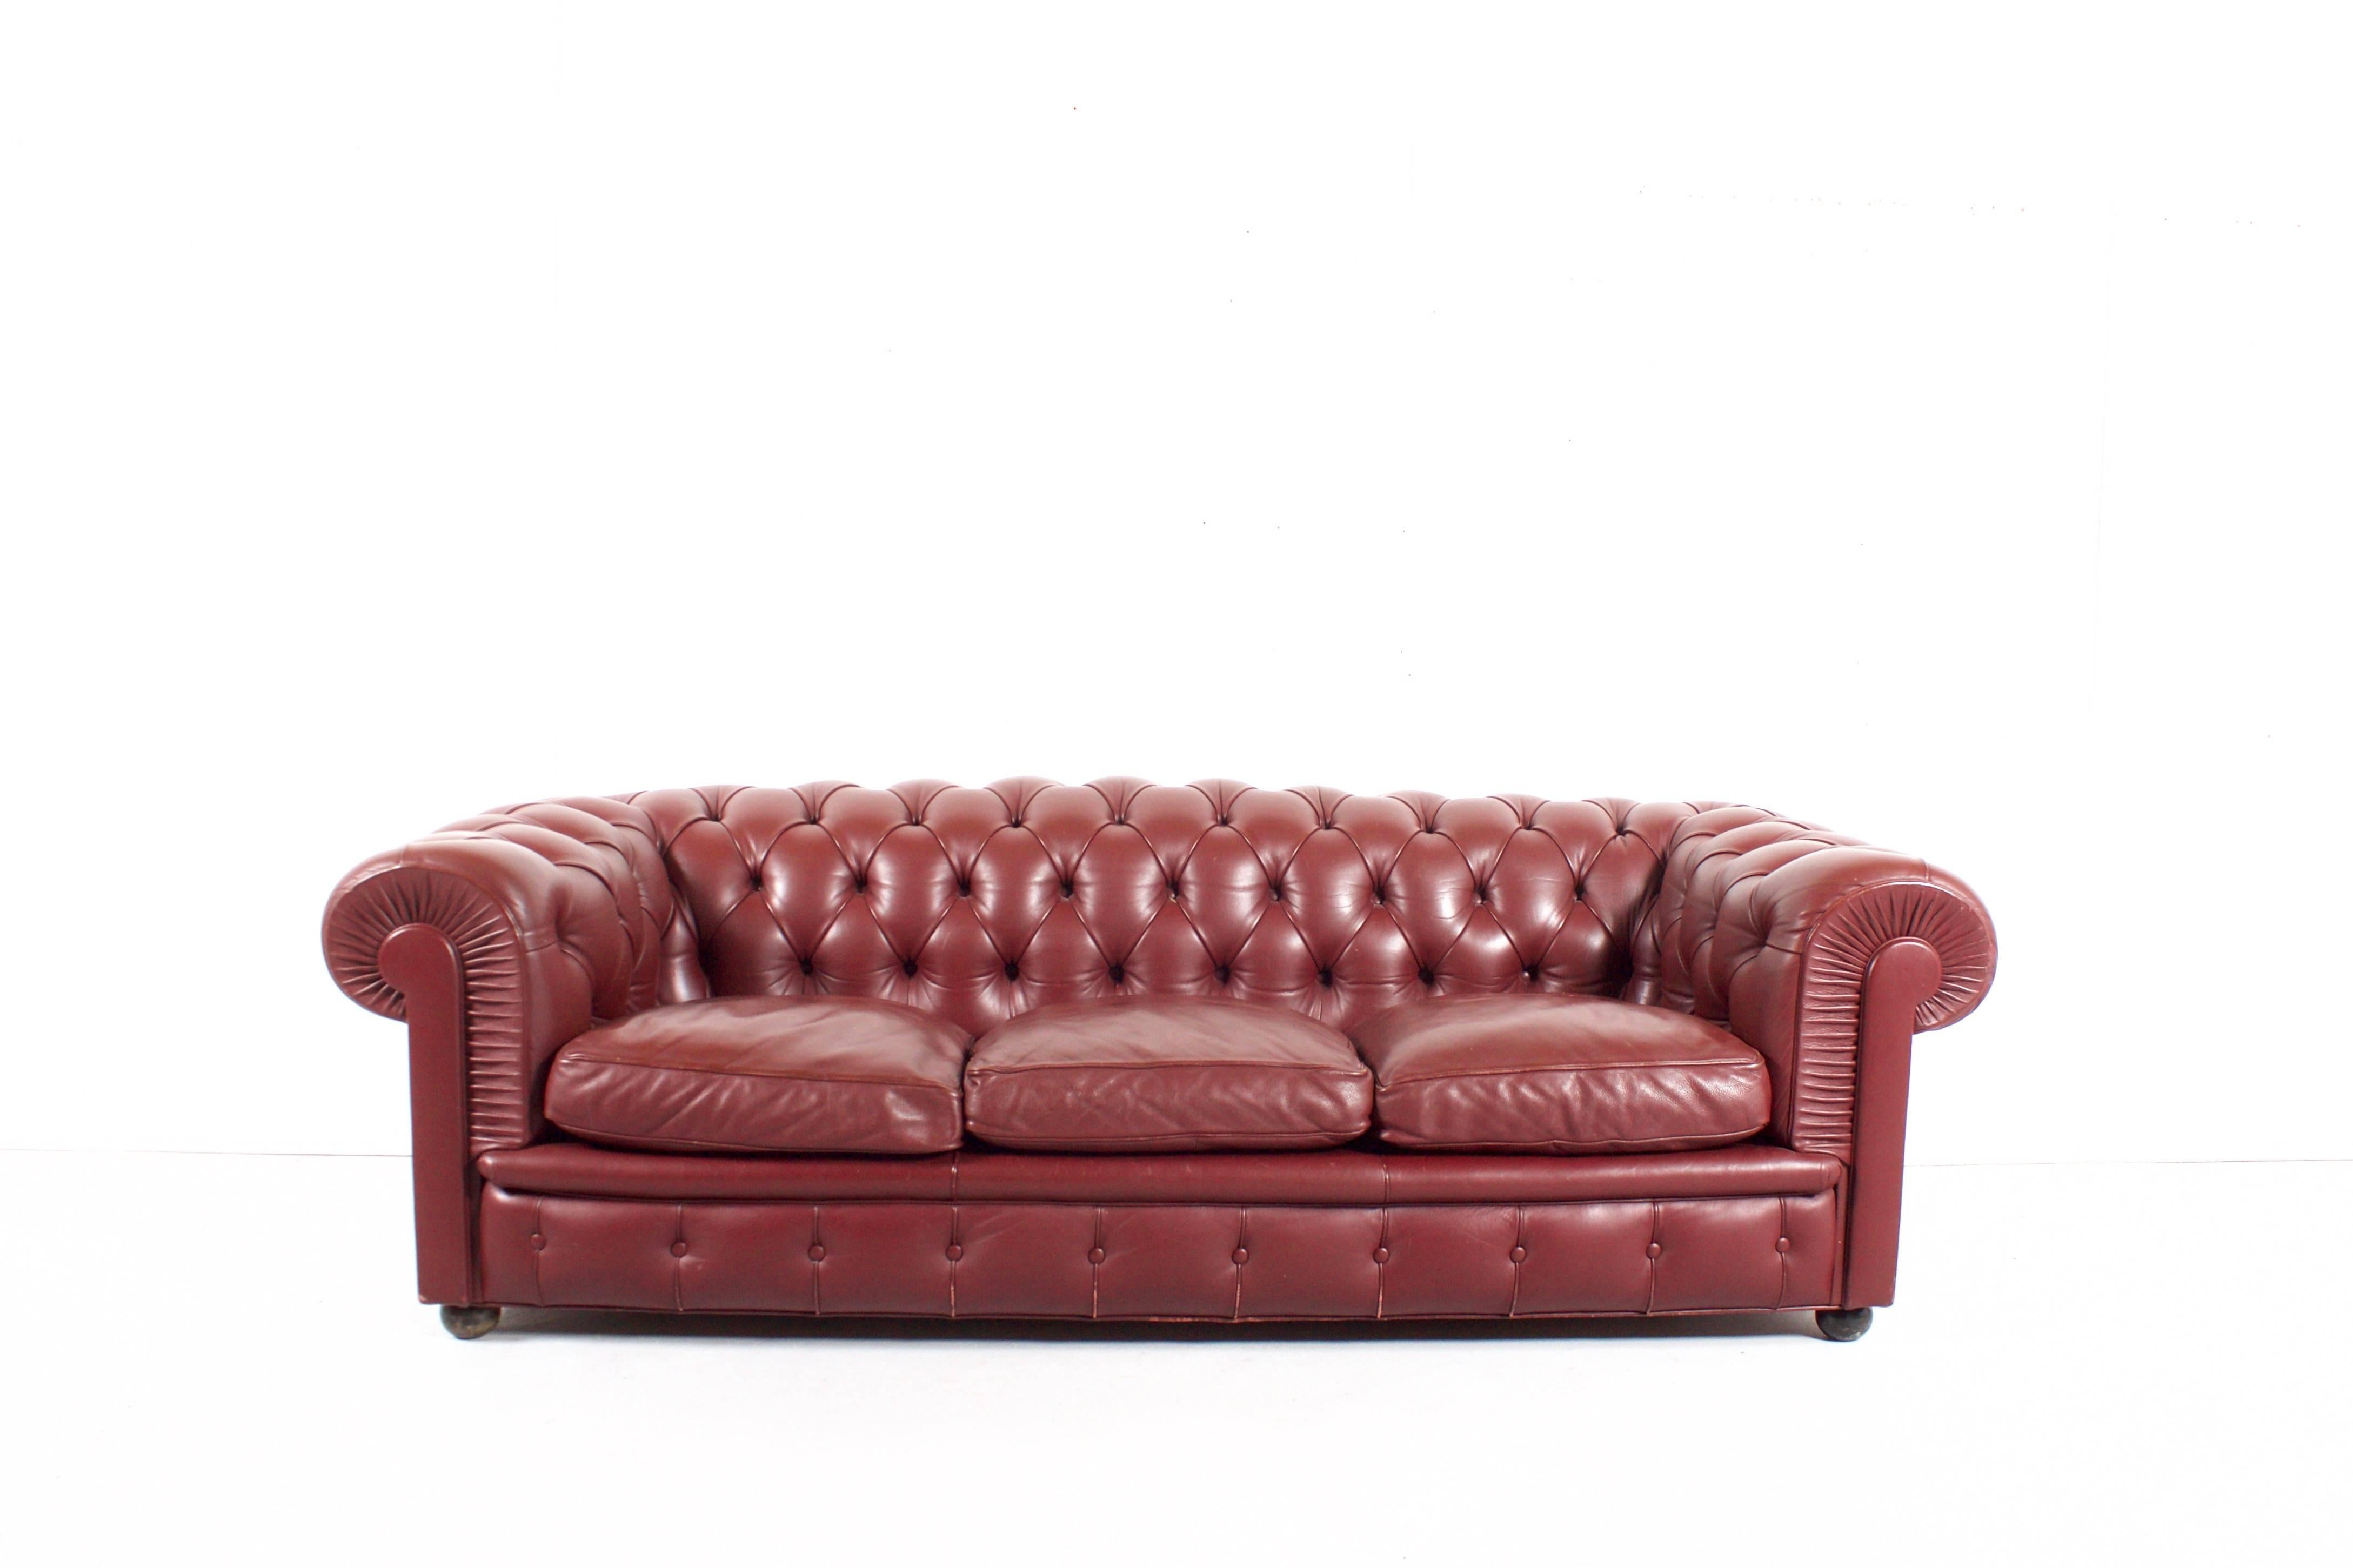 Poltrona Frau ‘Chester One’ Chesterfield Sofa in good condition.

Designed by Renzo Frau in 1912

Leather SC Oxblood 

Wooden feet 

Marked ‘Poltrona Frau’

Chester One evokes the classical armchair model of King Edward’s times, which Renzo Frau